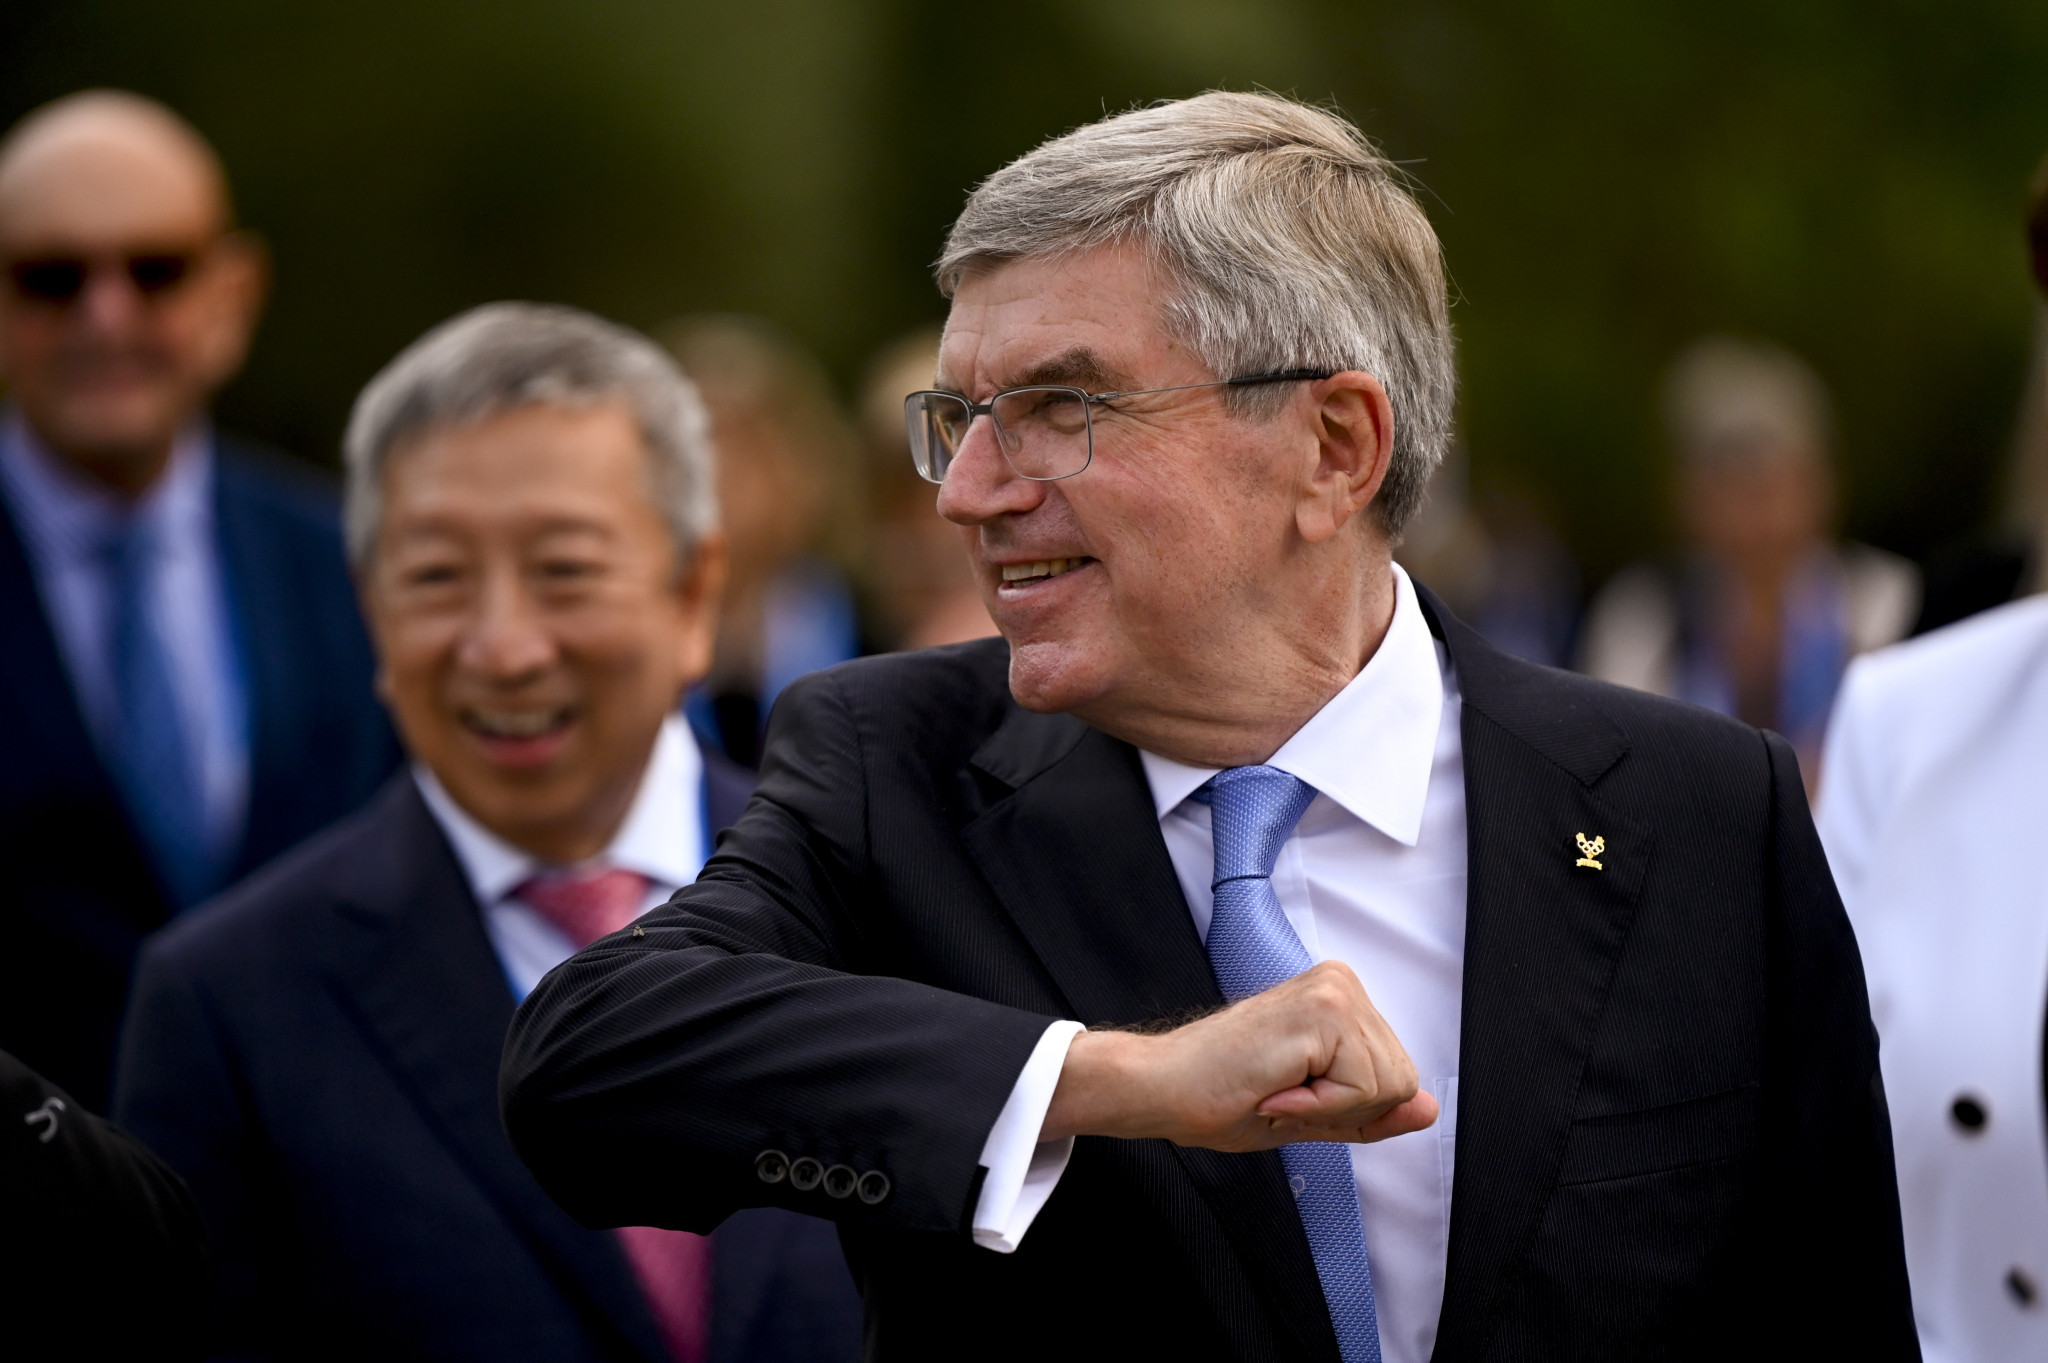 Weightlifting's governance issues has seen the sport on the brink of Olympic exclusion, as IOC President Thomas Bach announced earlier this month ©Getty Images